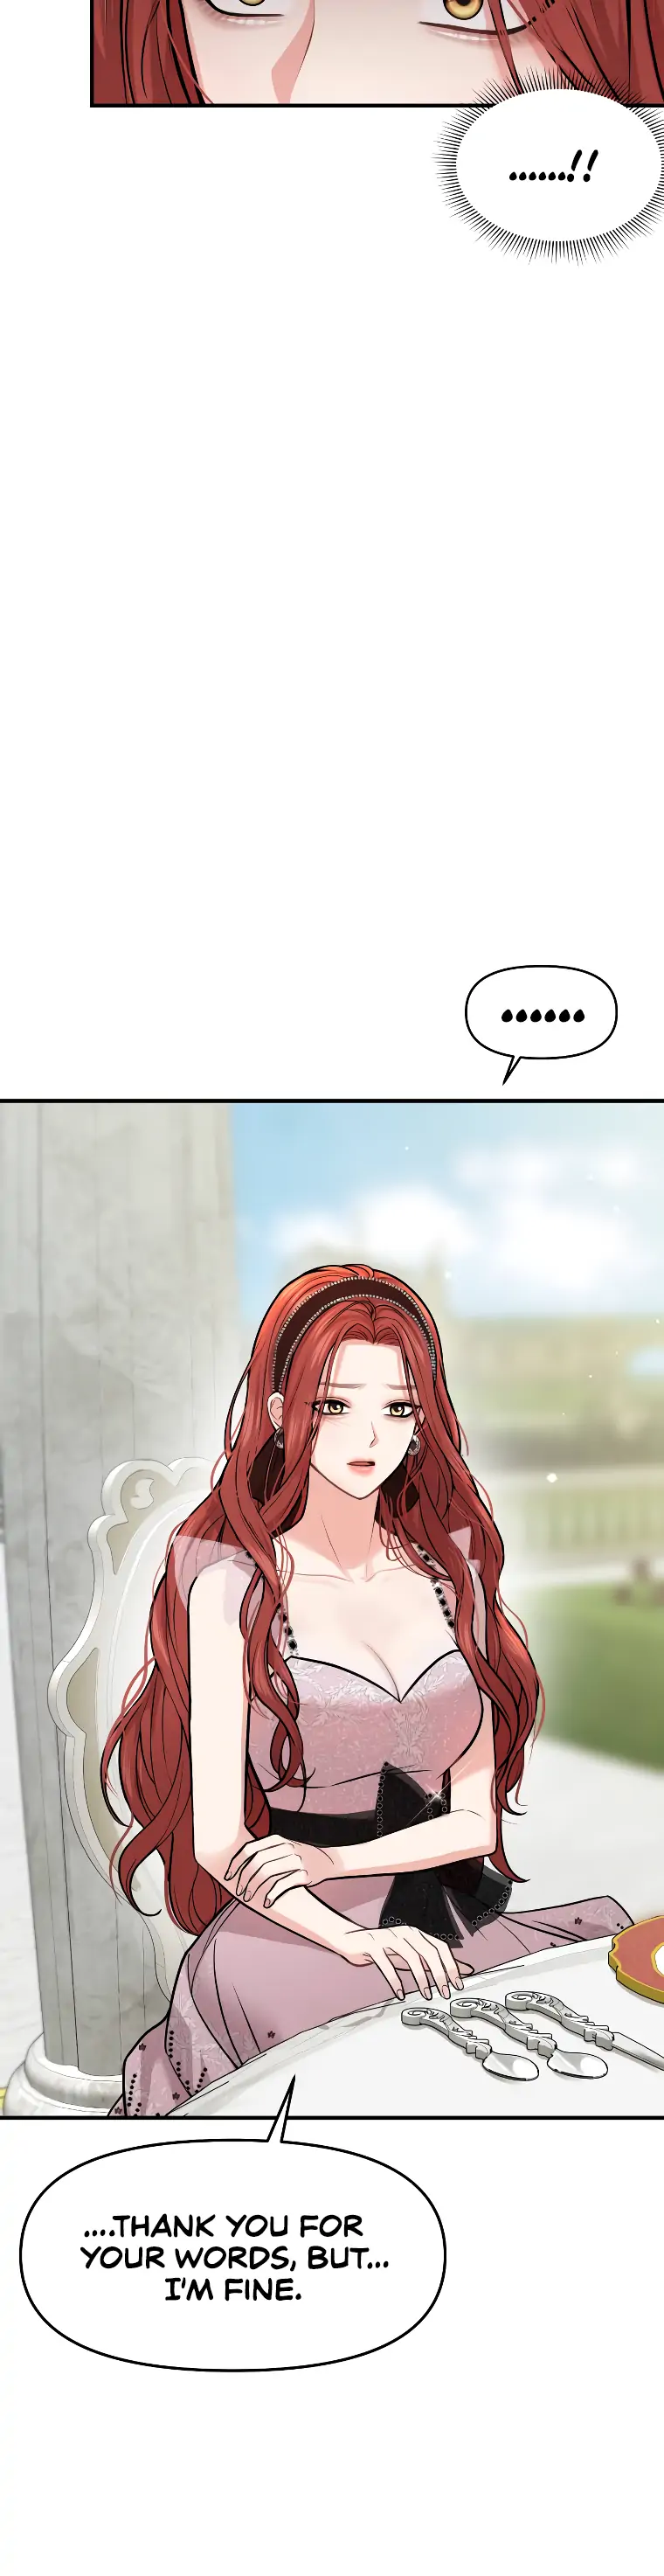 The Secret Bedroom of a Dejected Royal Daughter chapter 12